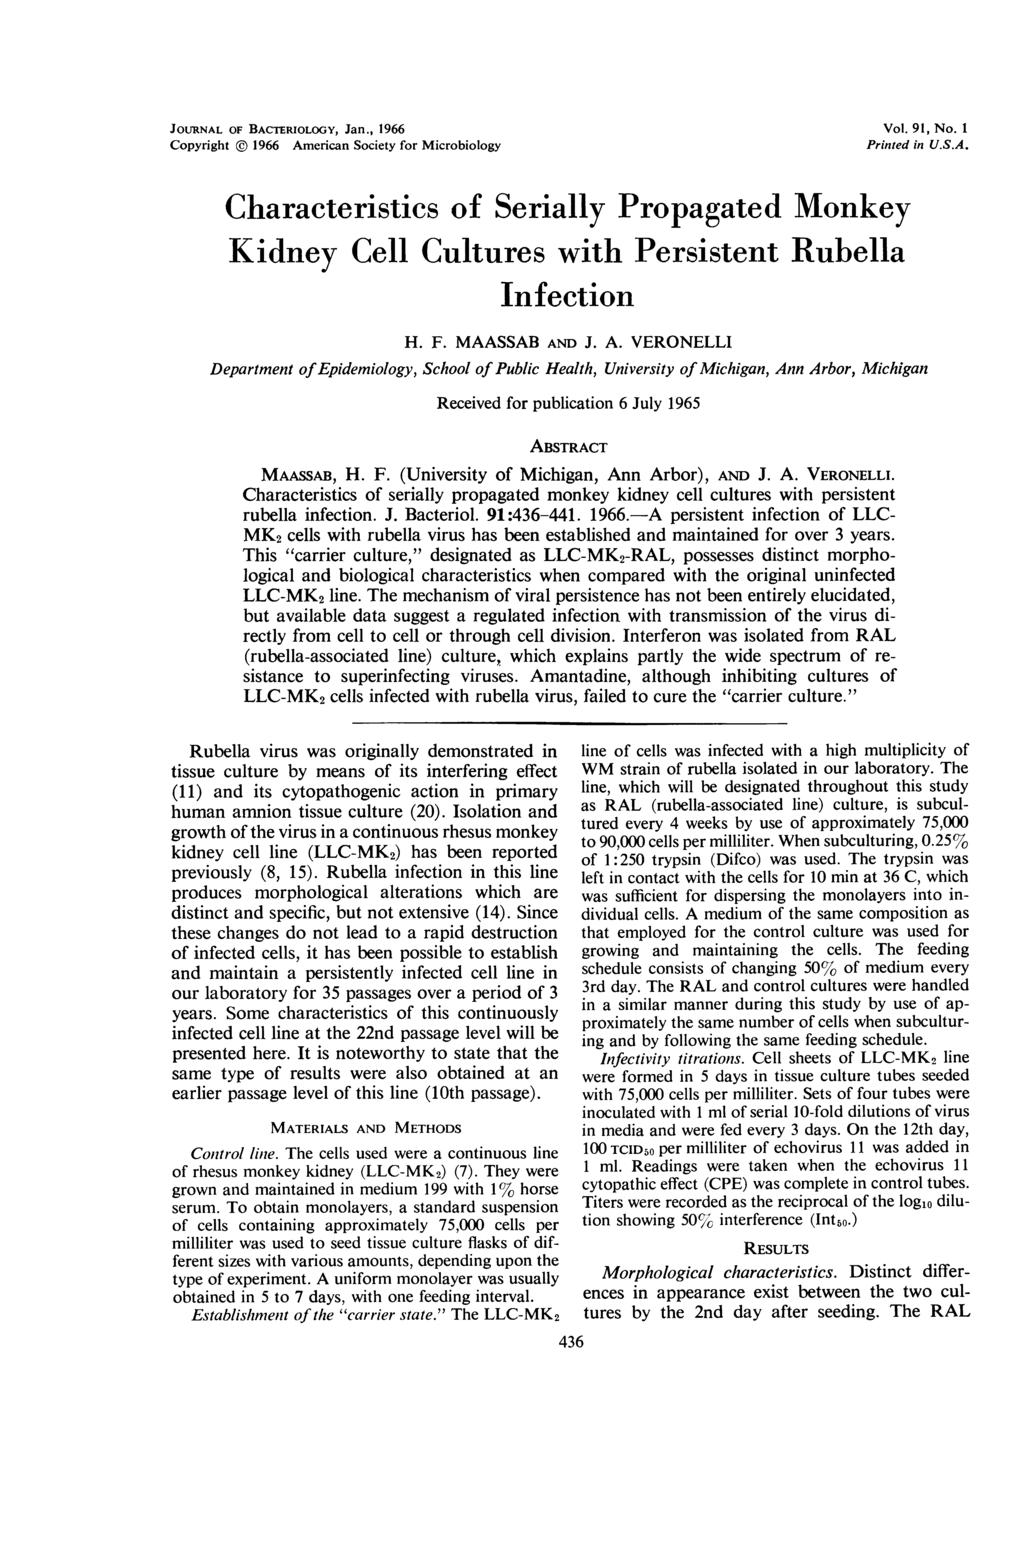 JOURNAL OF BACTERIOLOGY, Jan., 1966 Copyright 1966 American Society for Microbiology Vol. 91, No. 1 Printed in U.S.A. Characteristics of Serially Propagated Monkey Kidney Cell Cultures with Persistent Rubella Infection H.